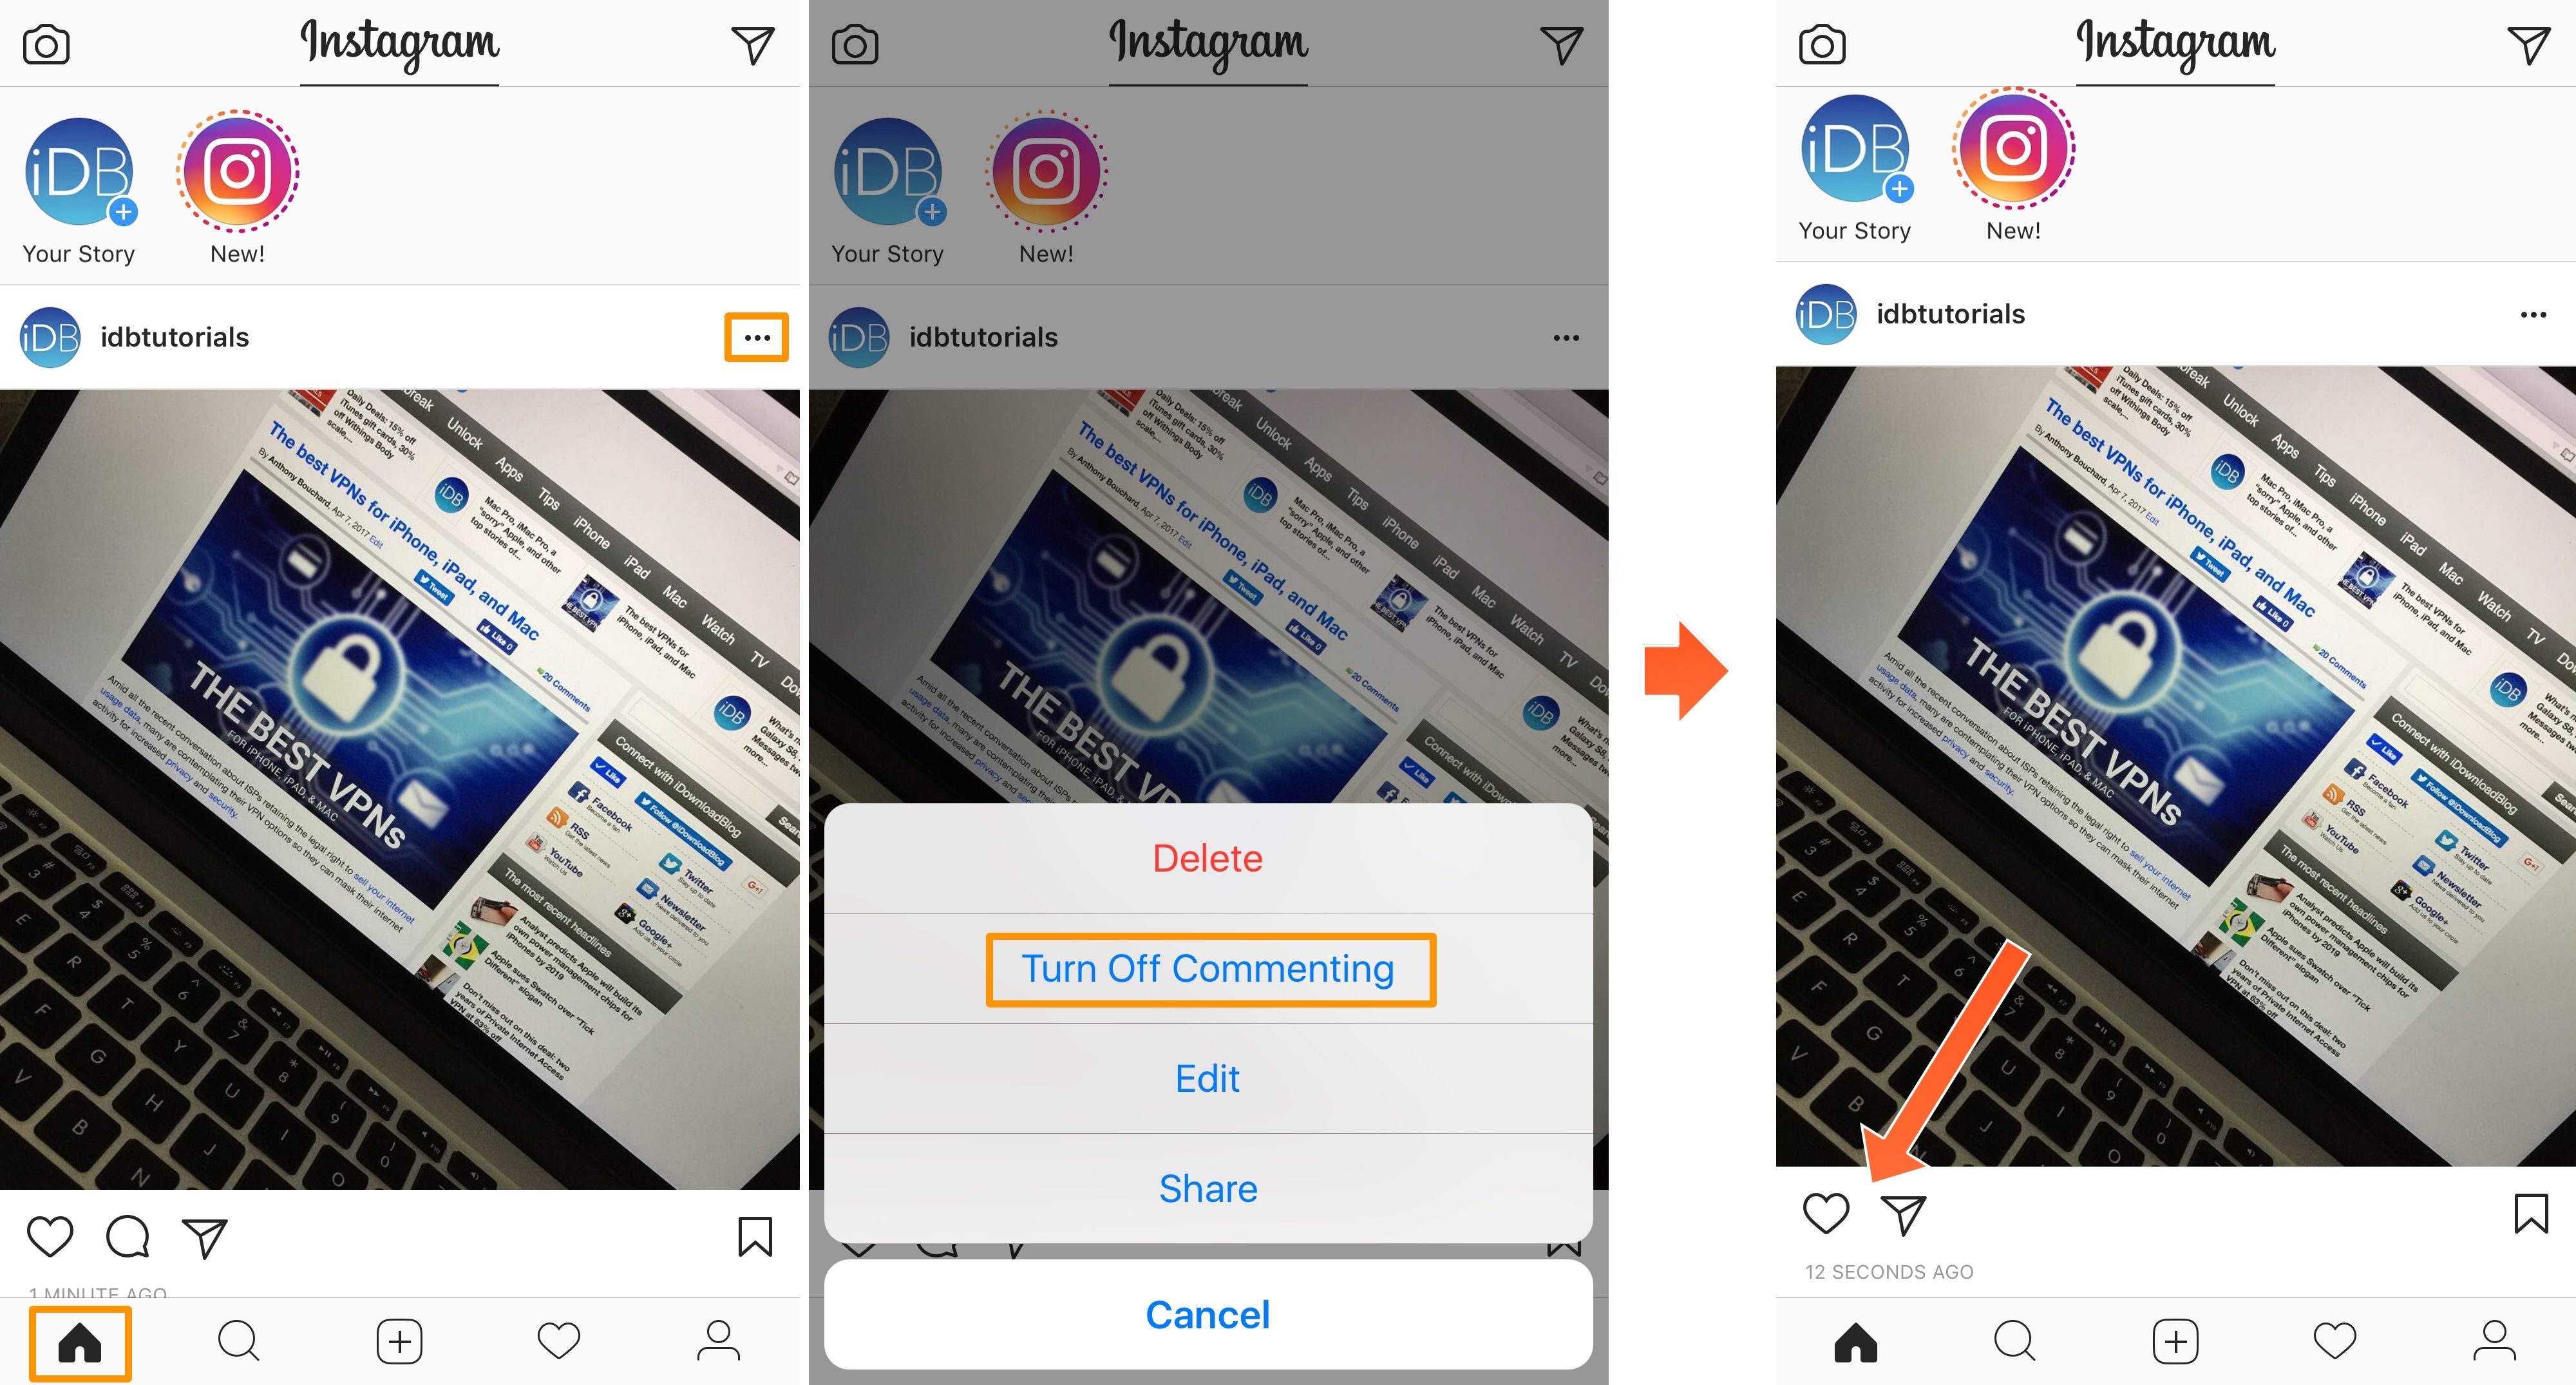 How to disable comments on your Instagram posts